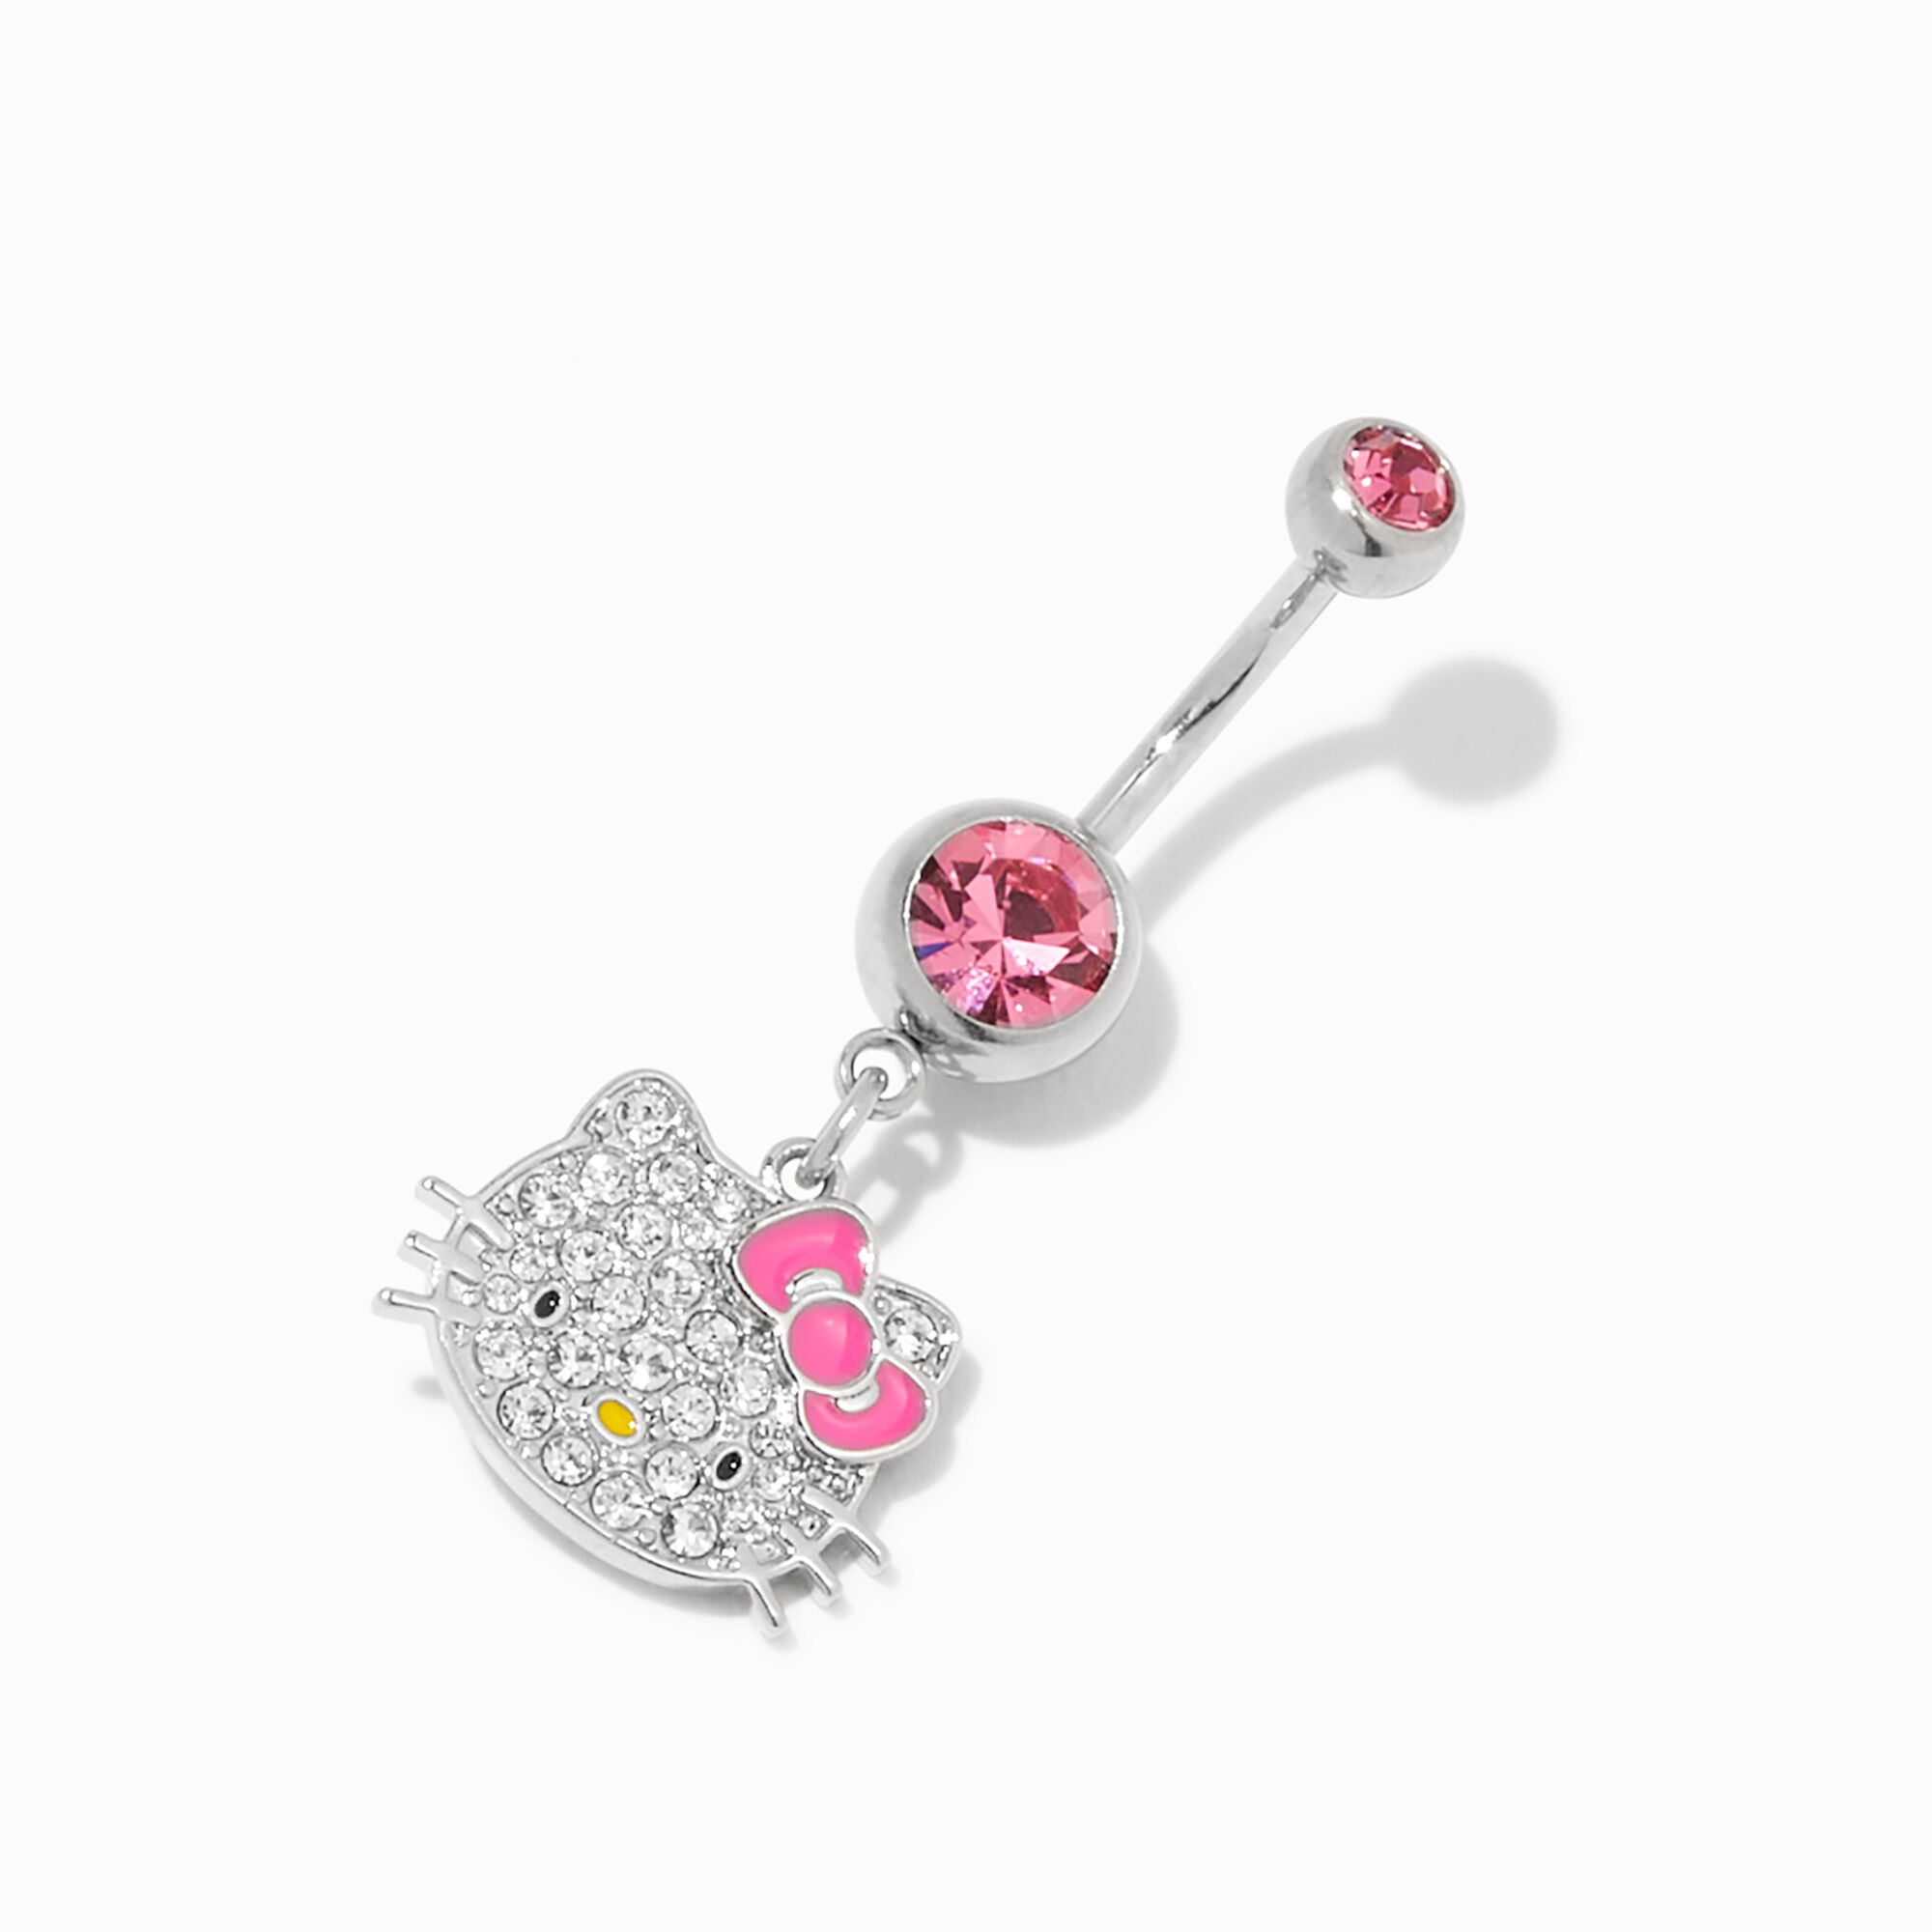 View Claires Hello Kitty Stainless Steel 14G Stone Crystal Charm Belly Ring Pink information